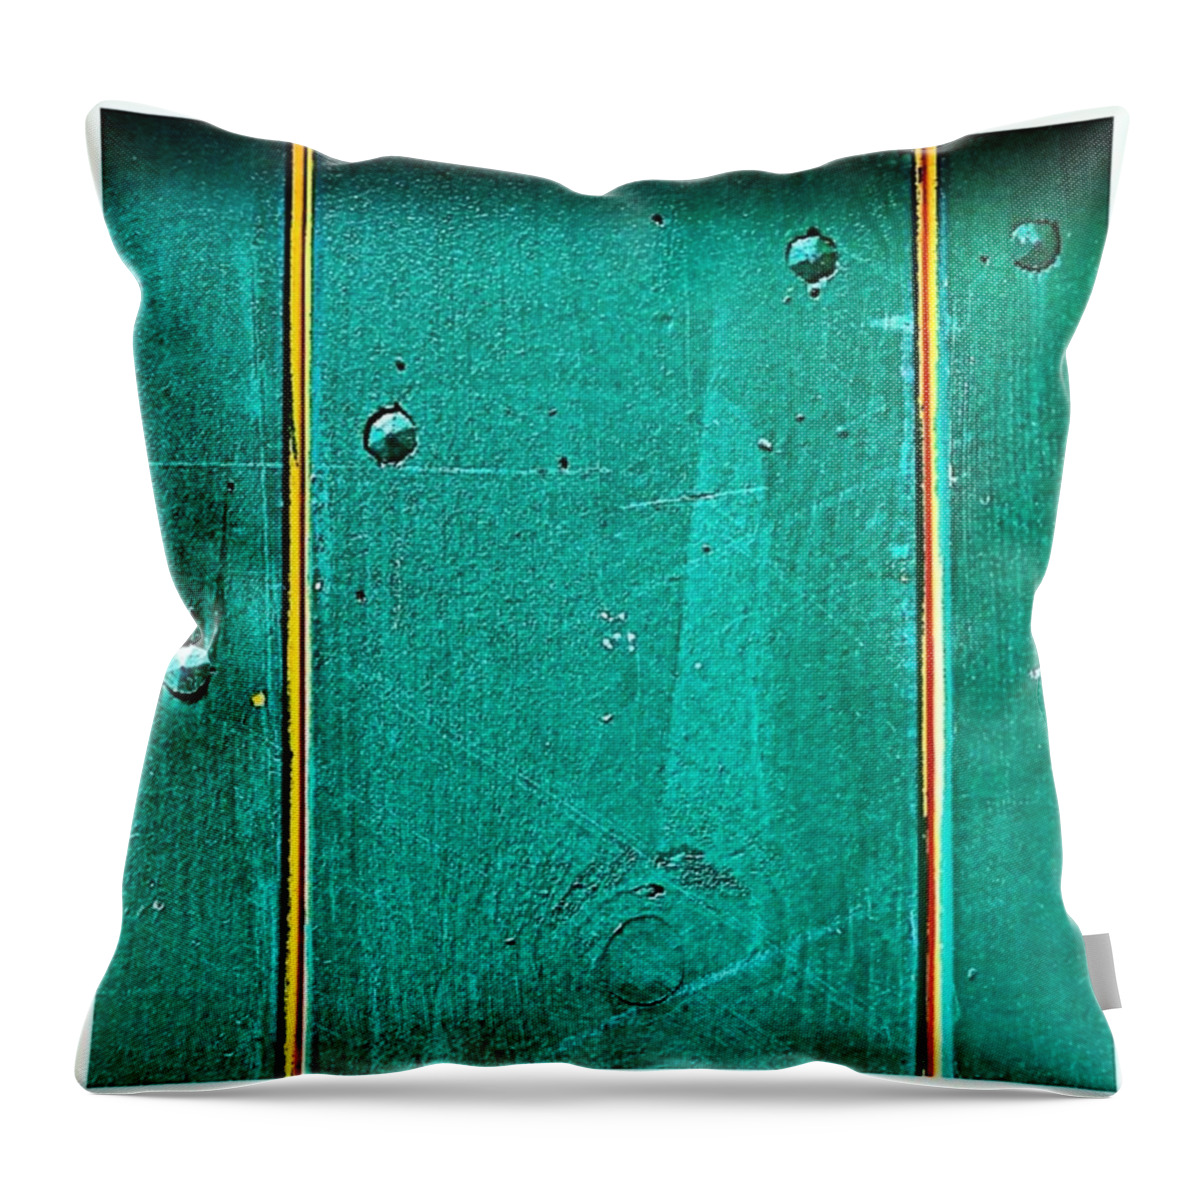 All_shots Throw Pillow featuring the photograph Straight #2 by Hans Fotoboek